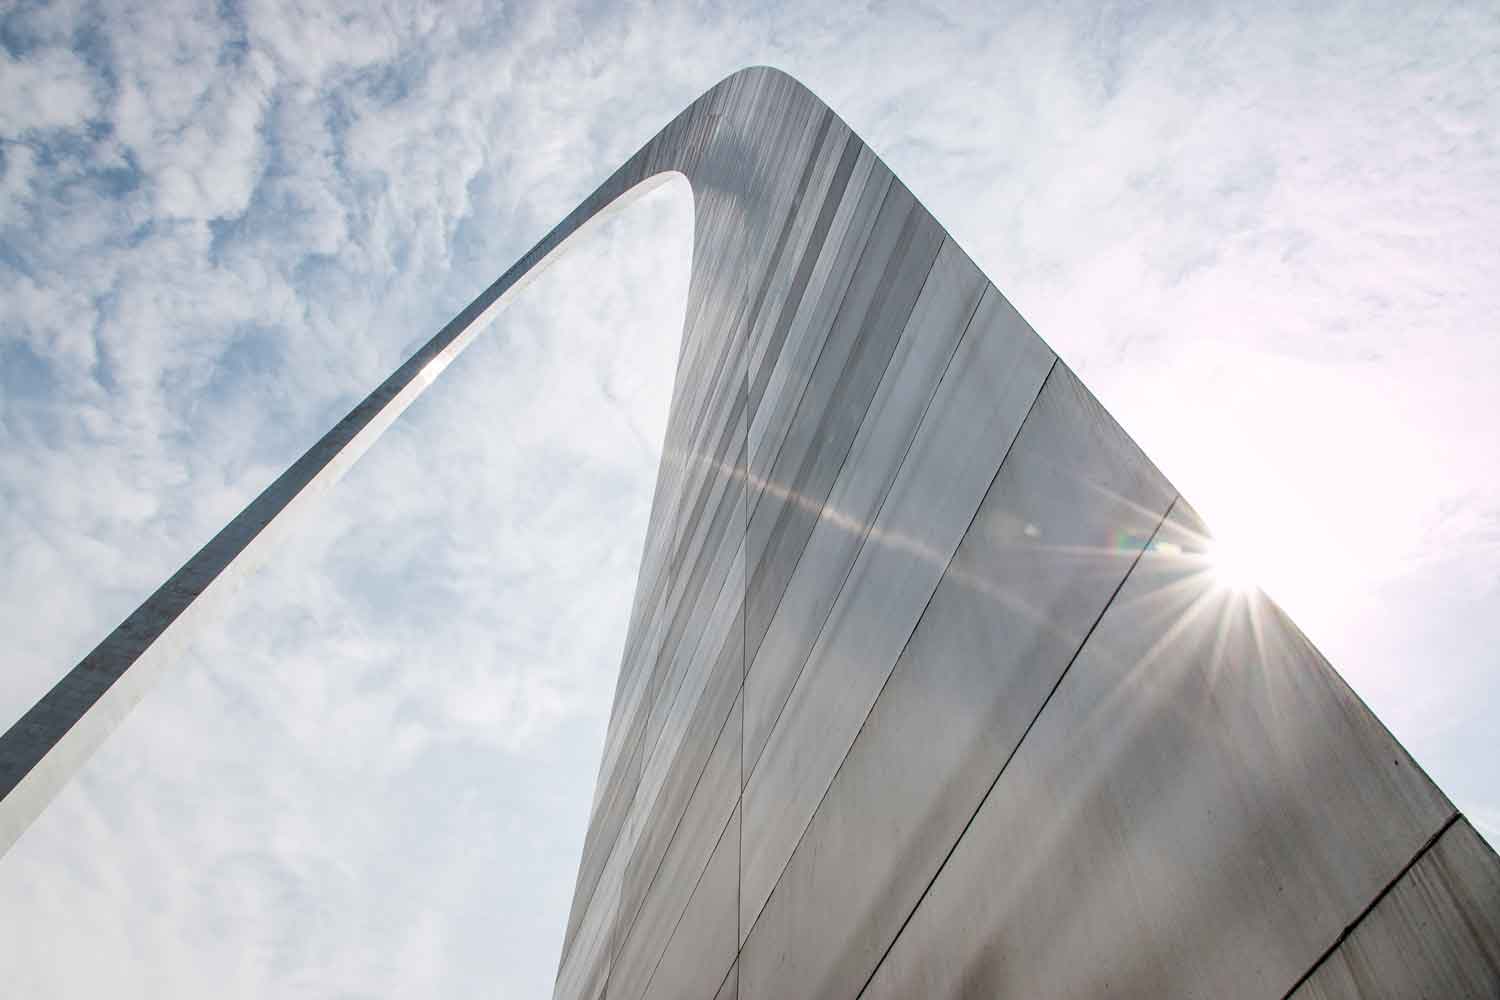 Quick Guide to St. Louis: Top Things to Do - Family Boarding Pass